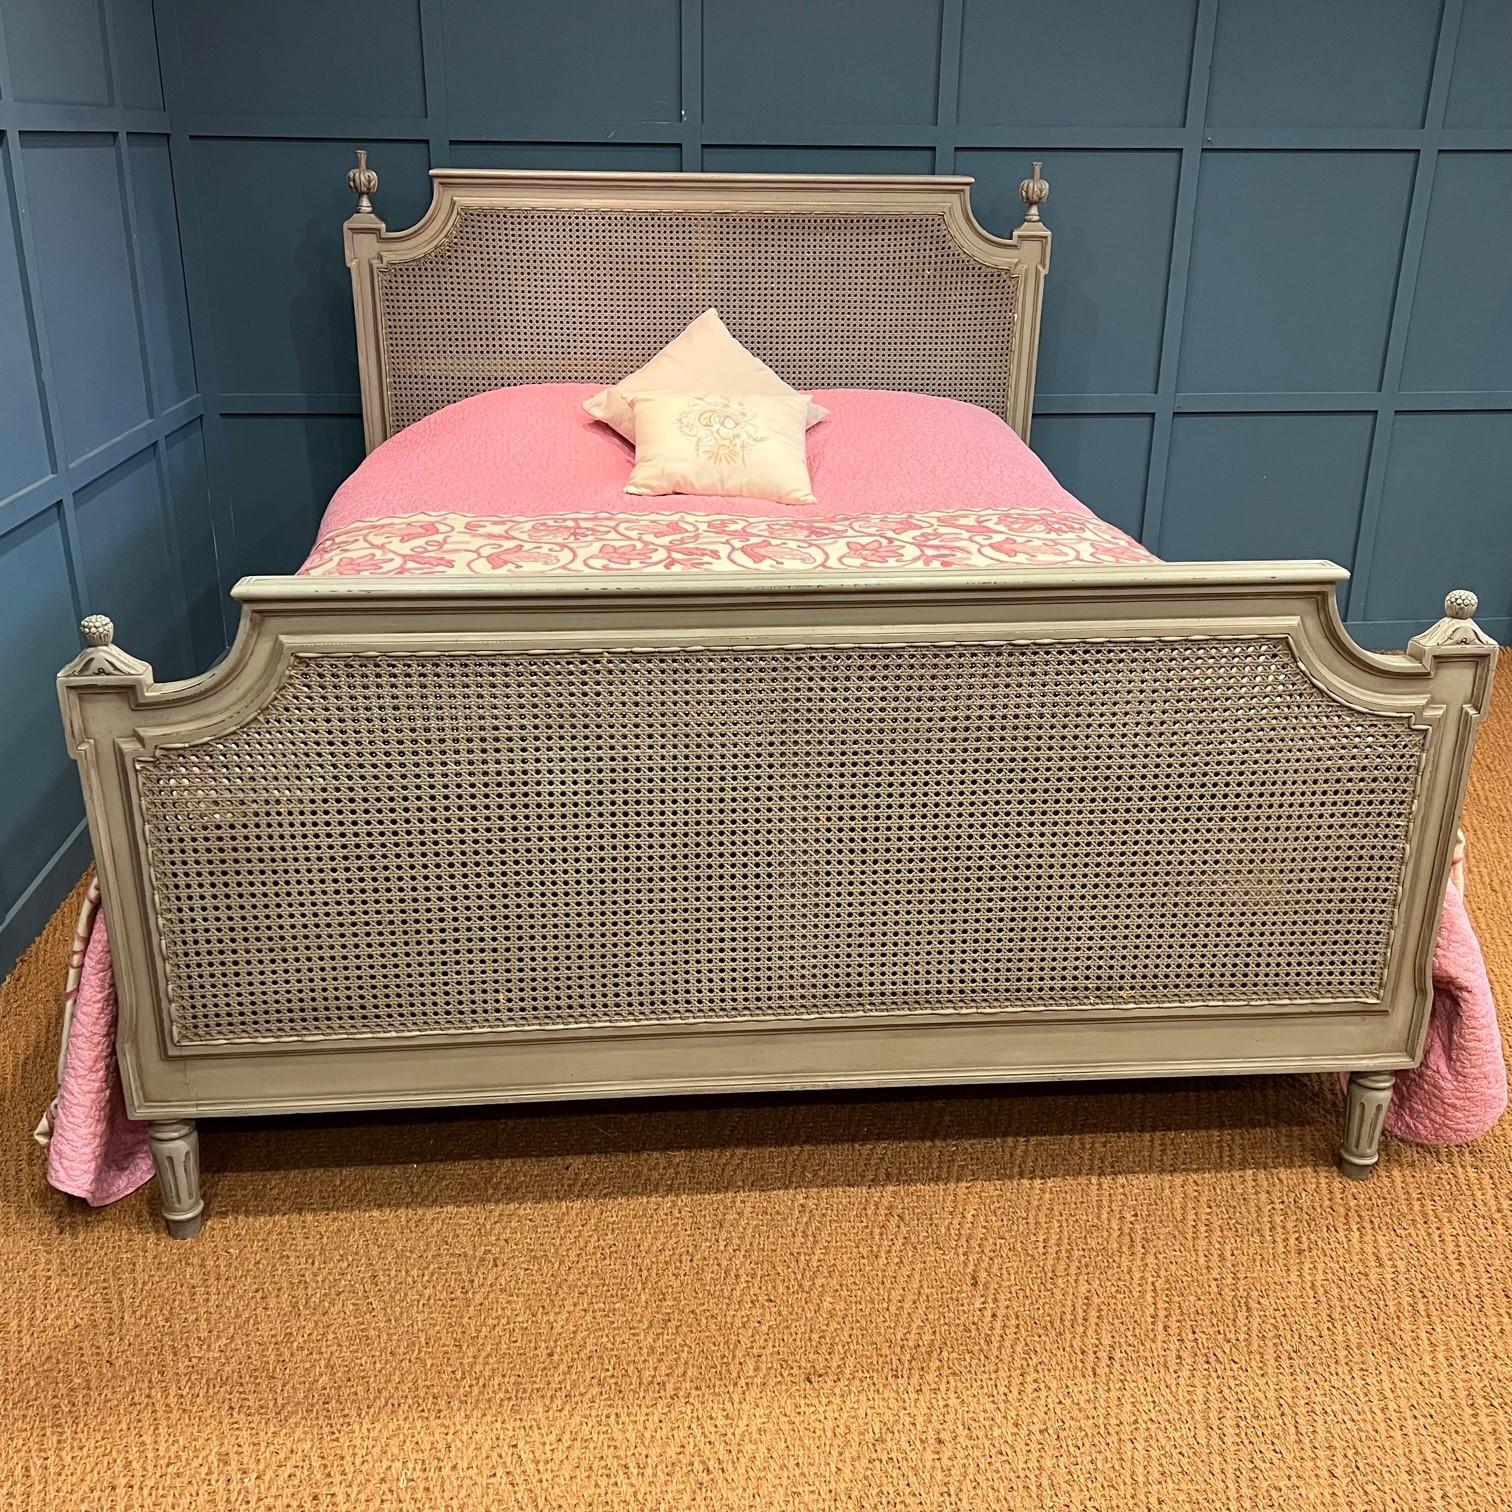 This attractive king size (5’wide) vintage cane bedframe originates from France.. The frame is painted in its original grey/green paint and shows some sign of wear in places due to its age – it has a slightly distressed look to it. The cane is in